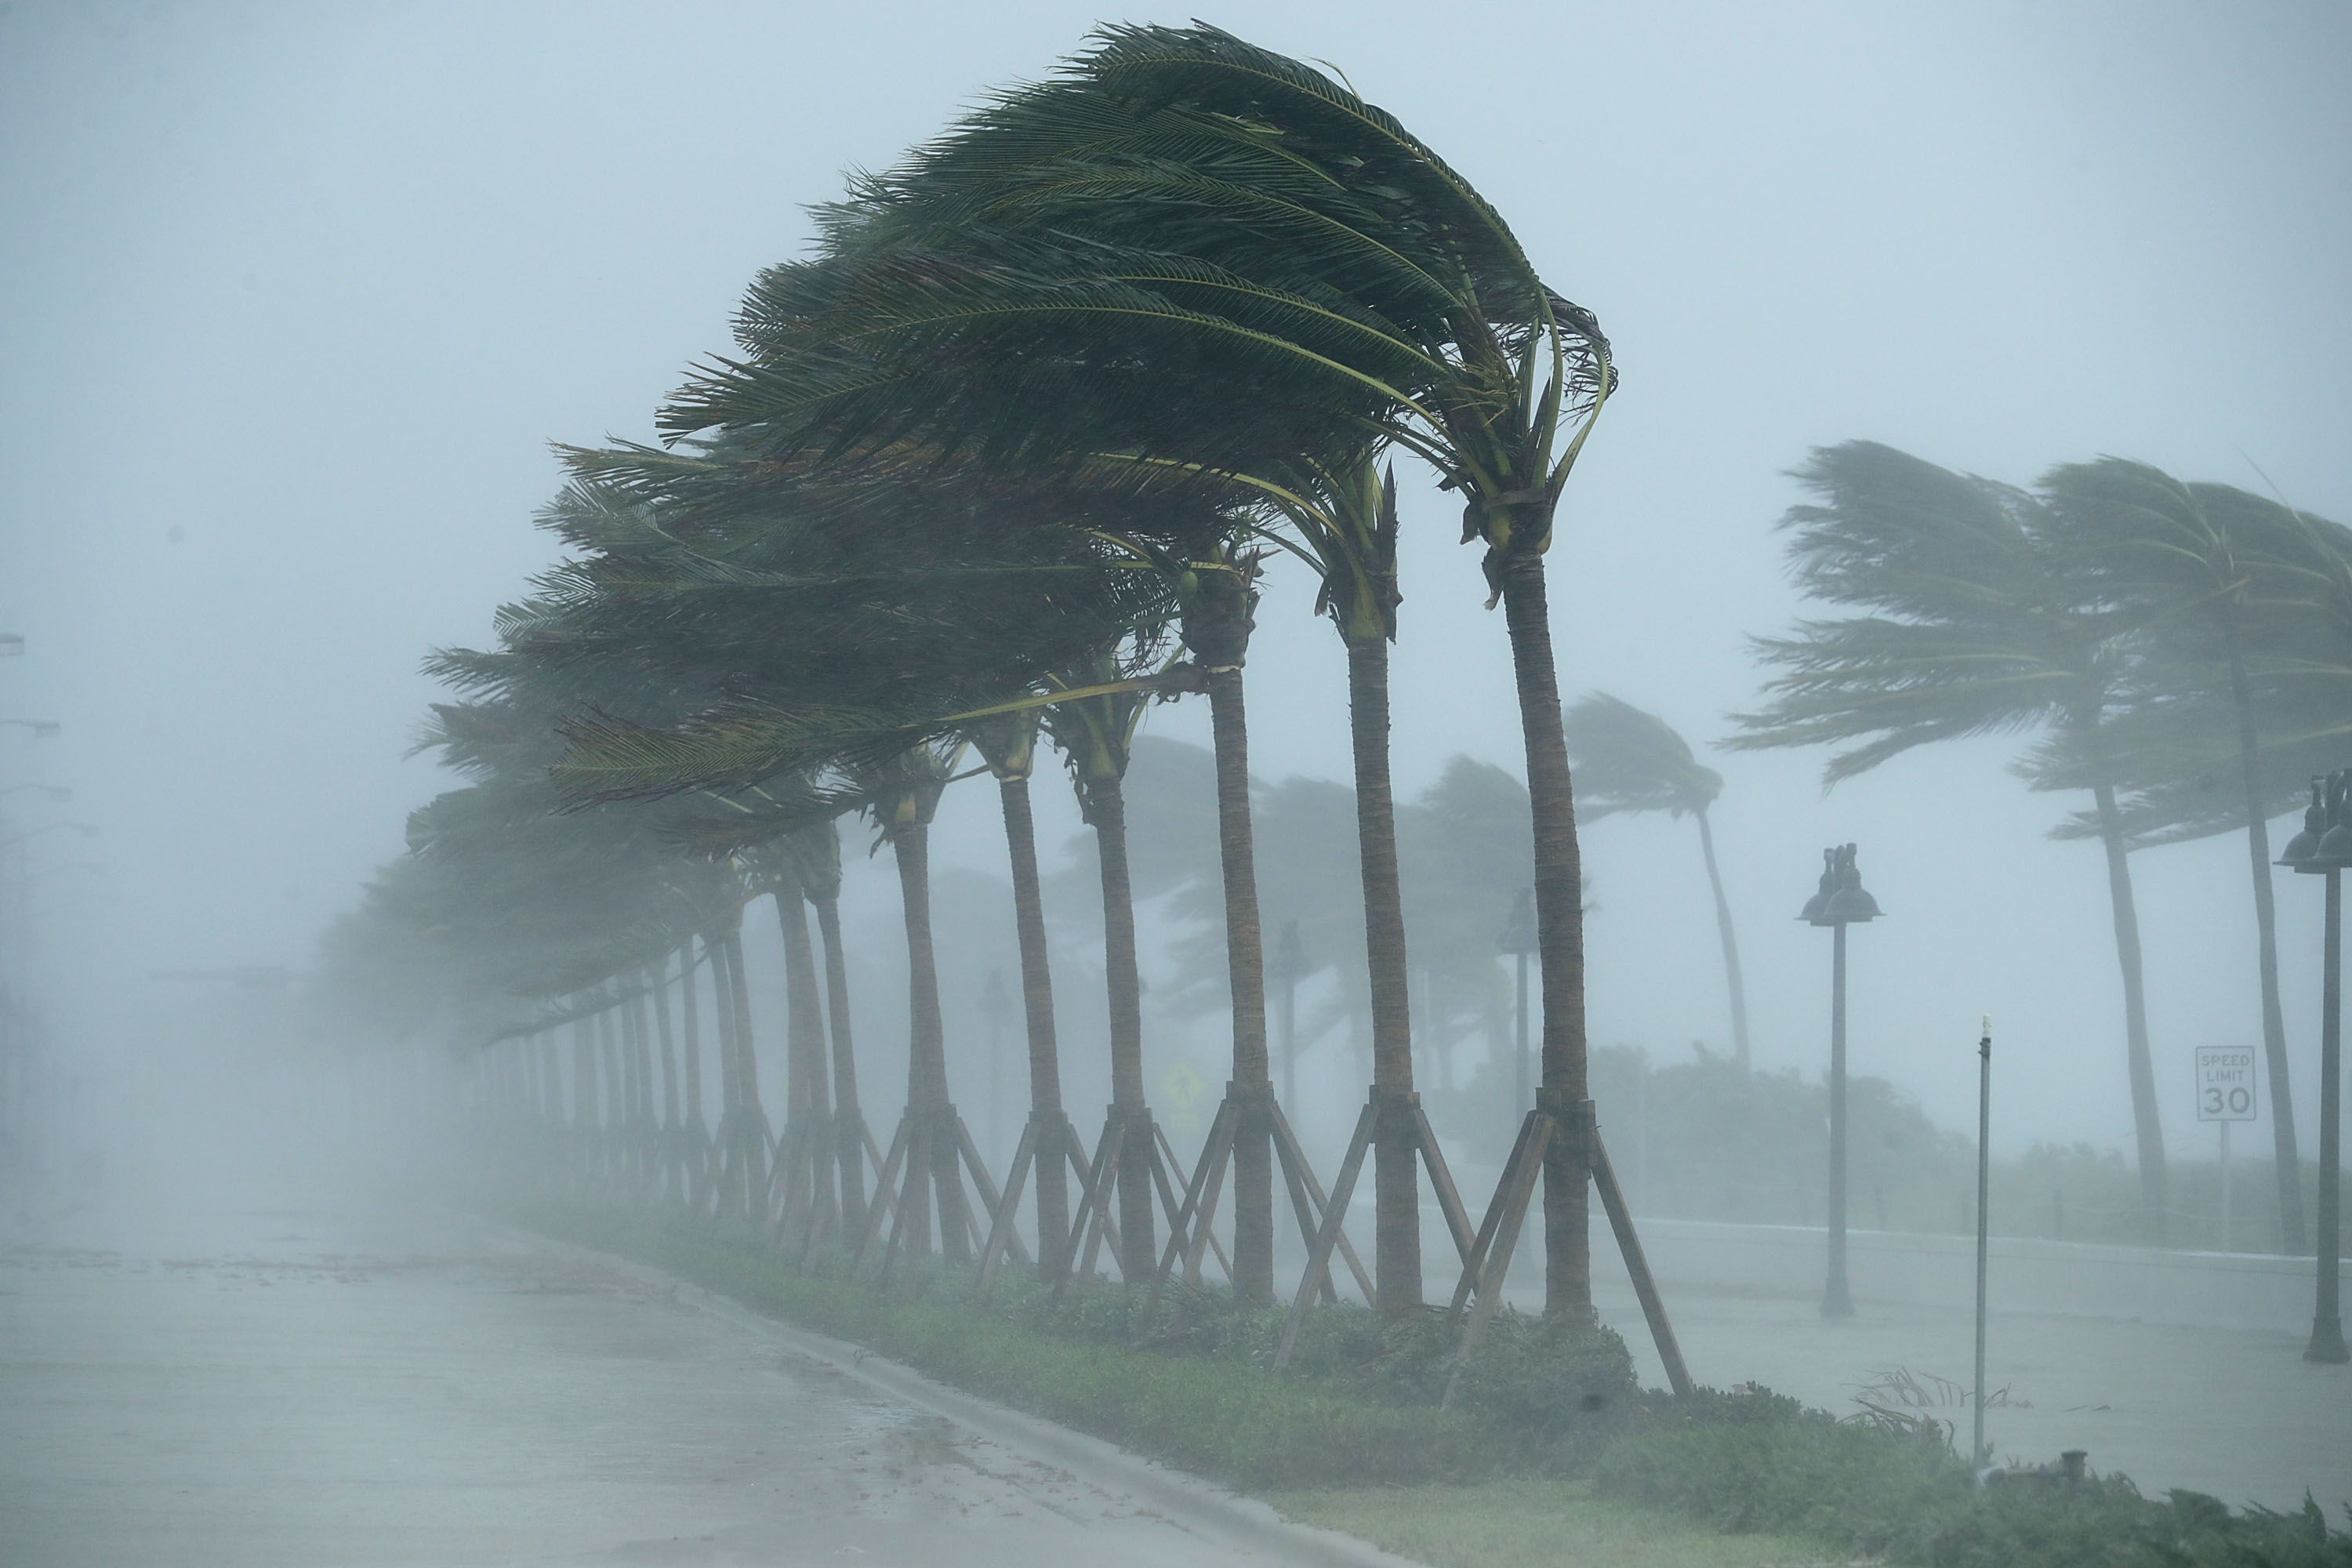 Trees bend in the tropical storm wind along North Fort Lauderdale Beach Boulevard as Hurricane Irma hits the southern part of the state September 10, 2017 in Fort Lauderdale, Florida. The powerful hurricane made landfall in the United States in the Florida Keys at 9:10 a.m. after raking across the north coast of Cuba. (Photo by Chip Somodevilla/Getty Images)